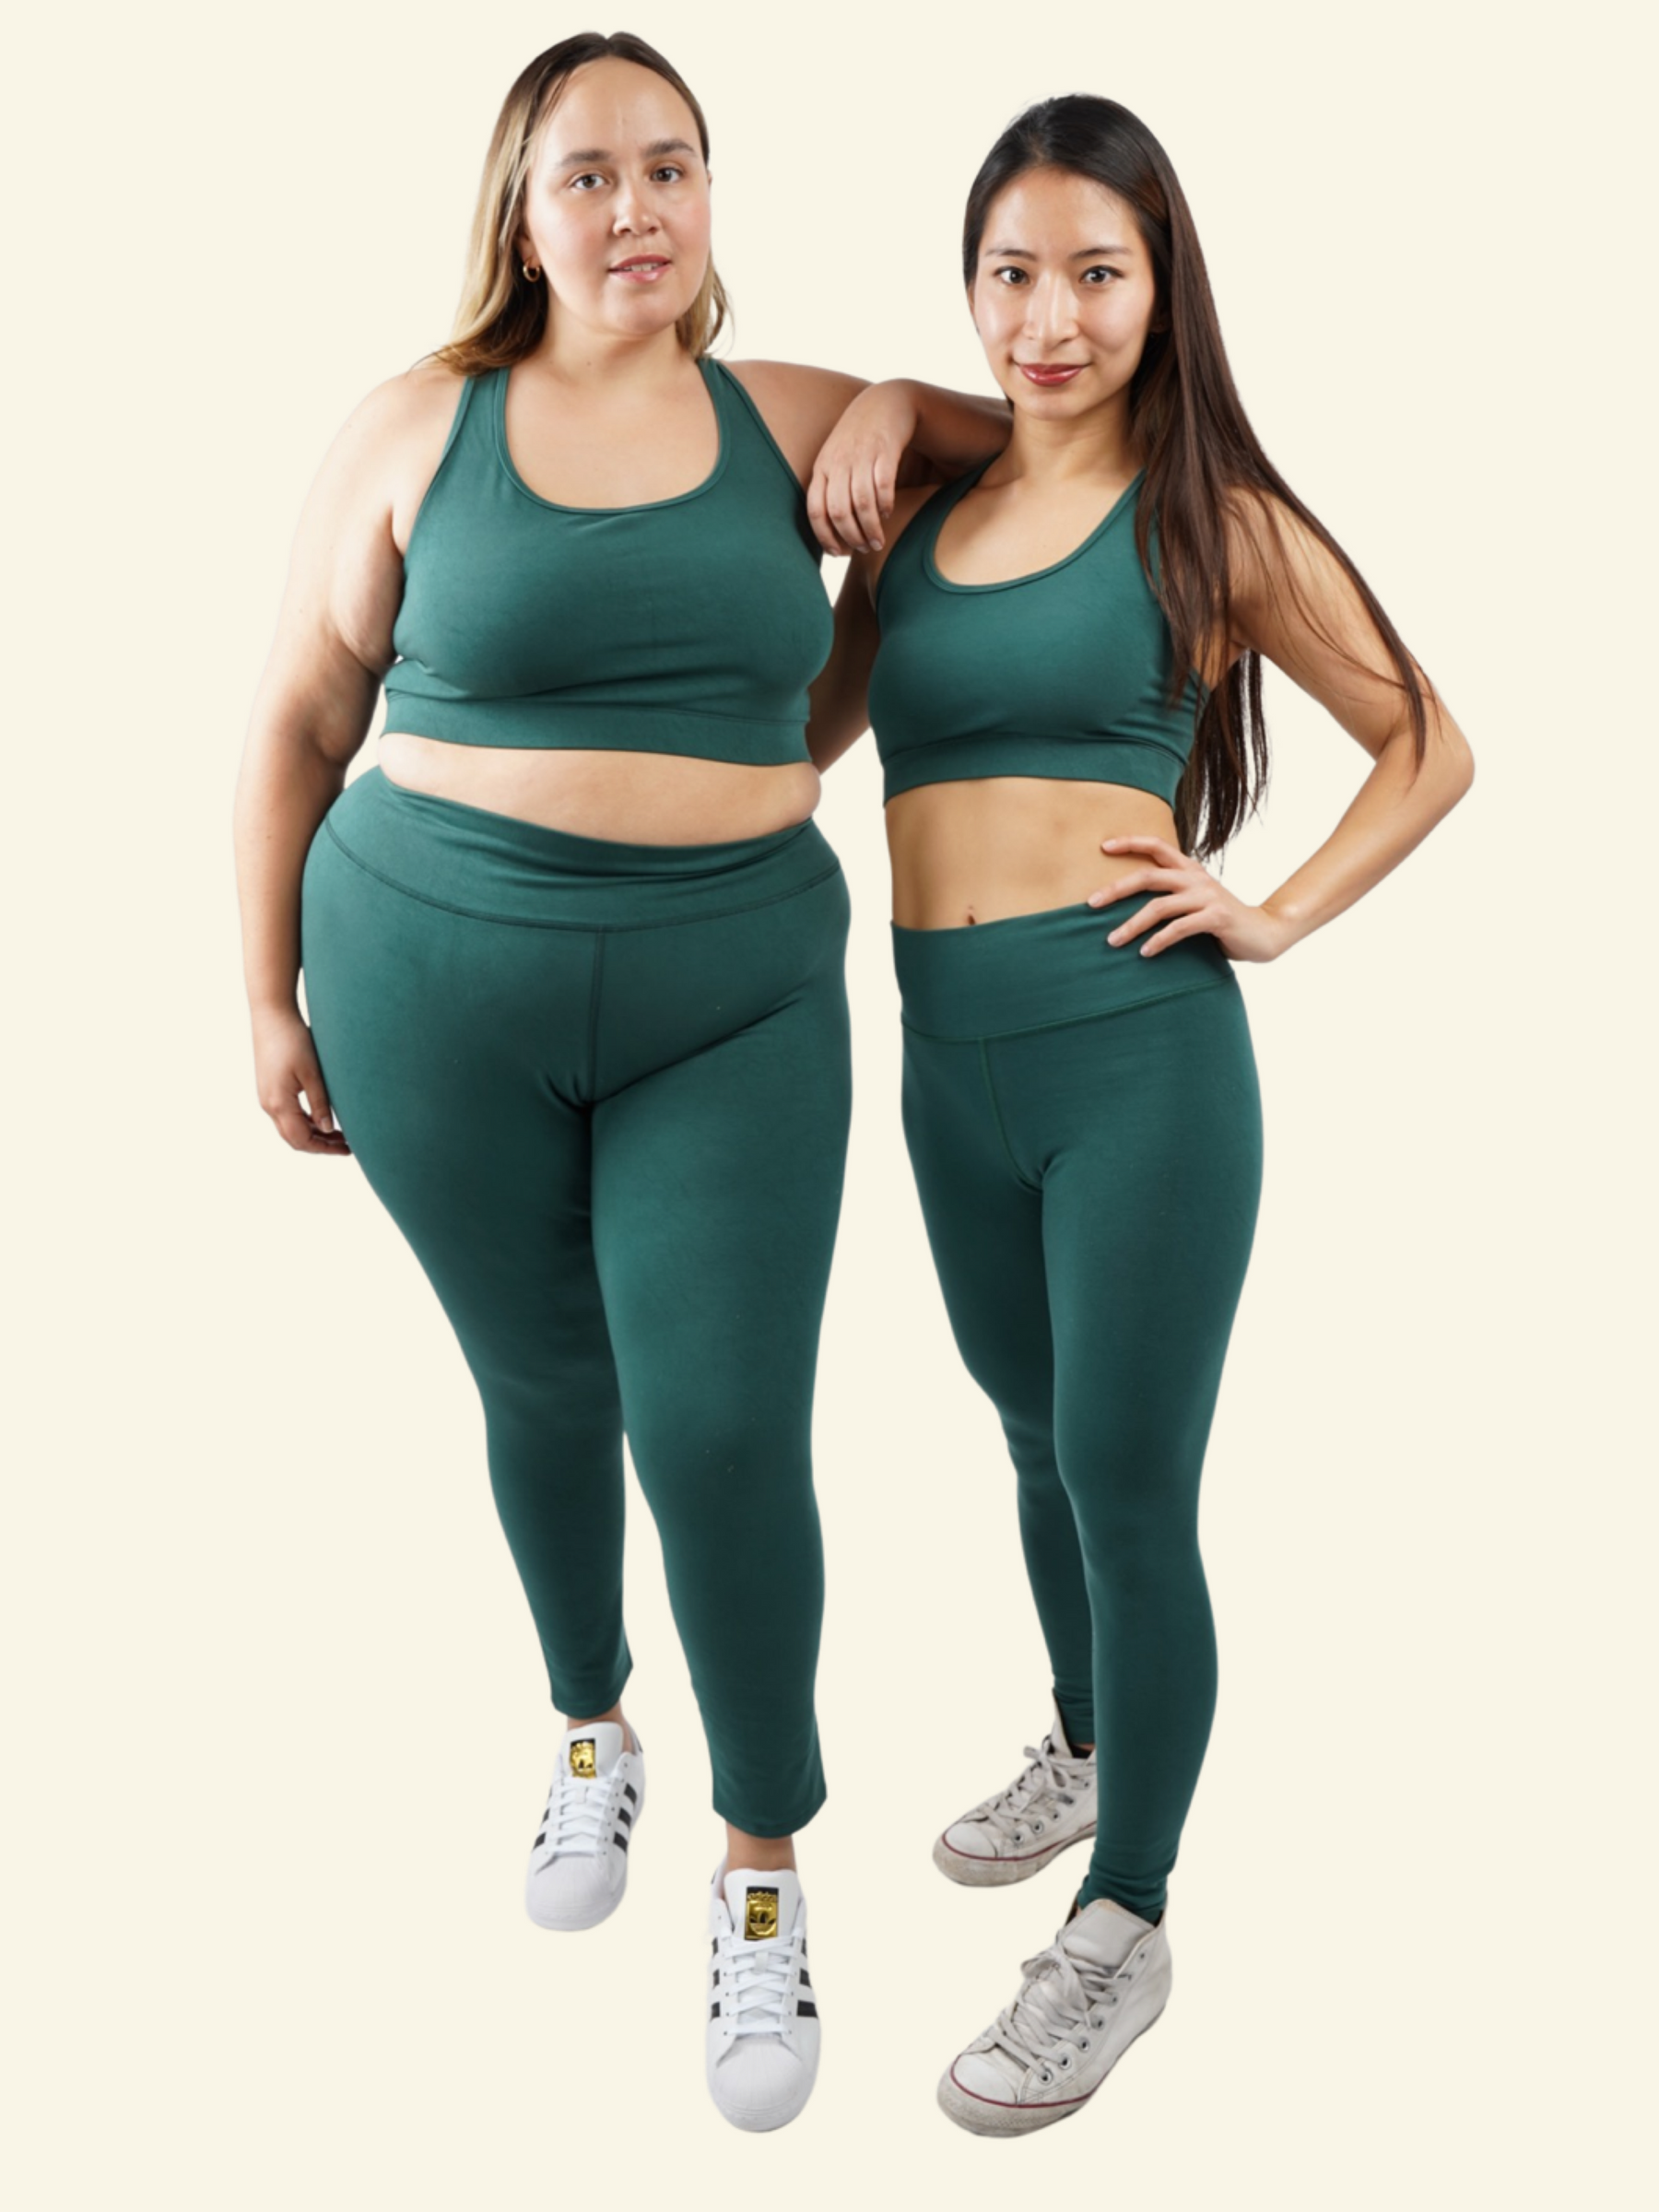 emerald green sustainable active wear matching set